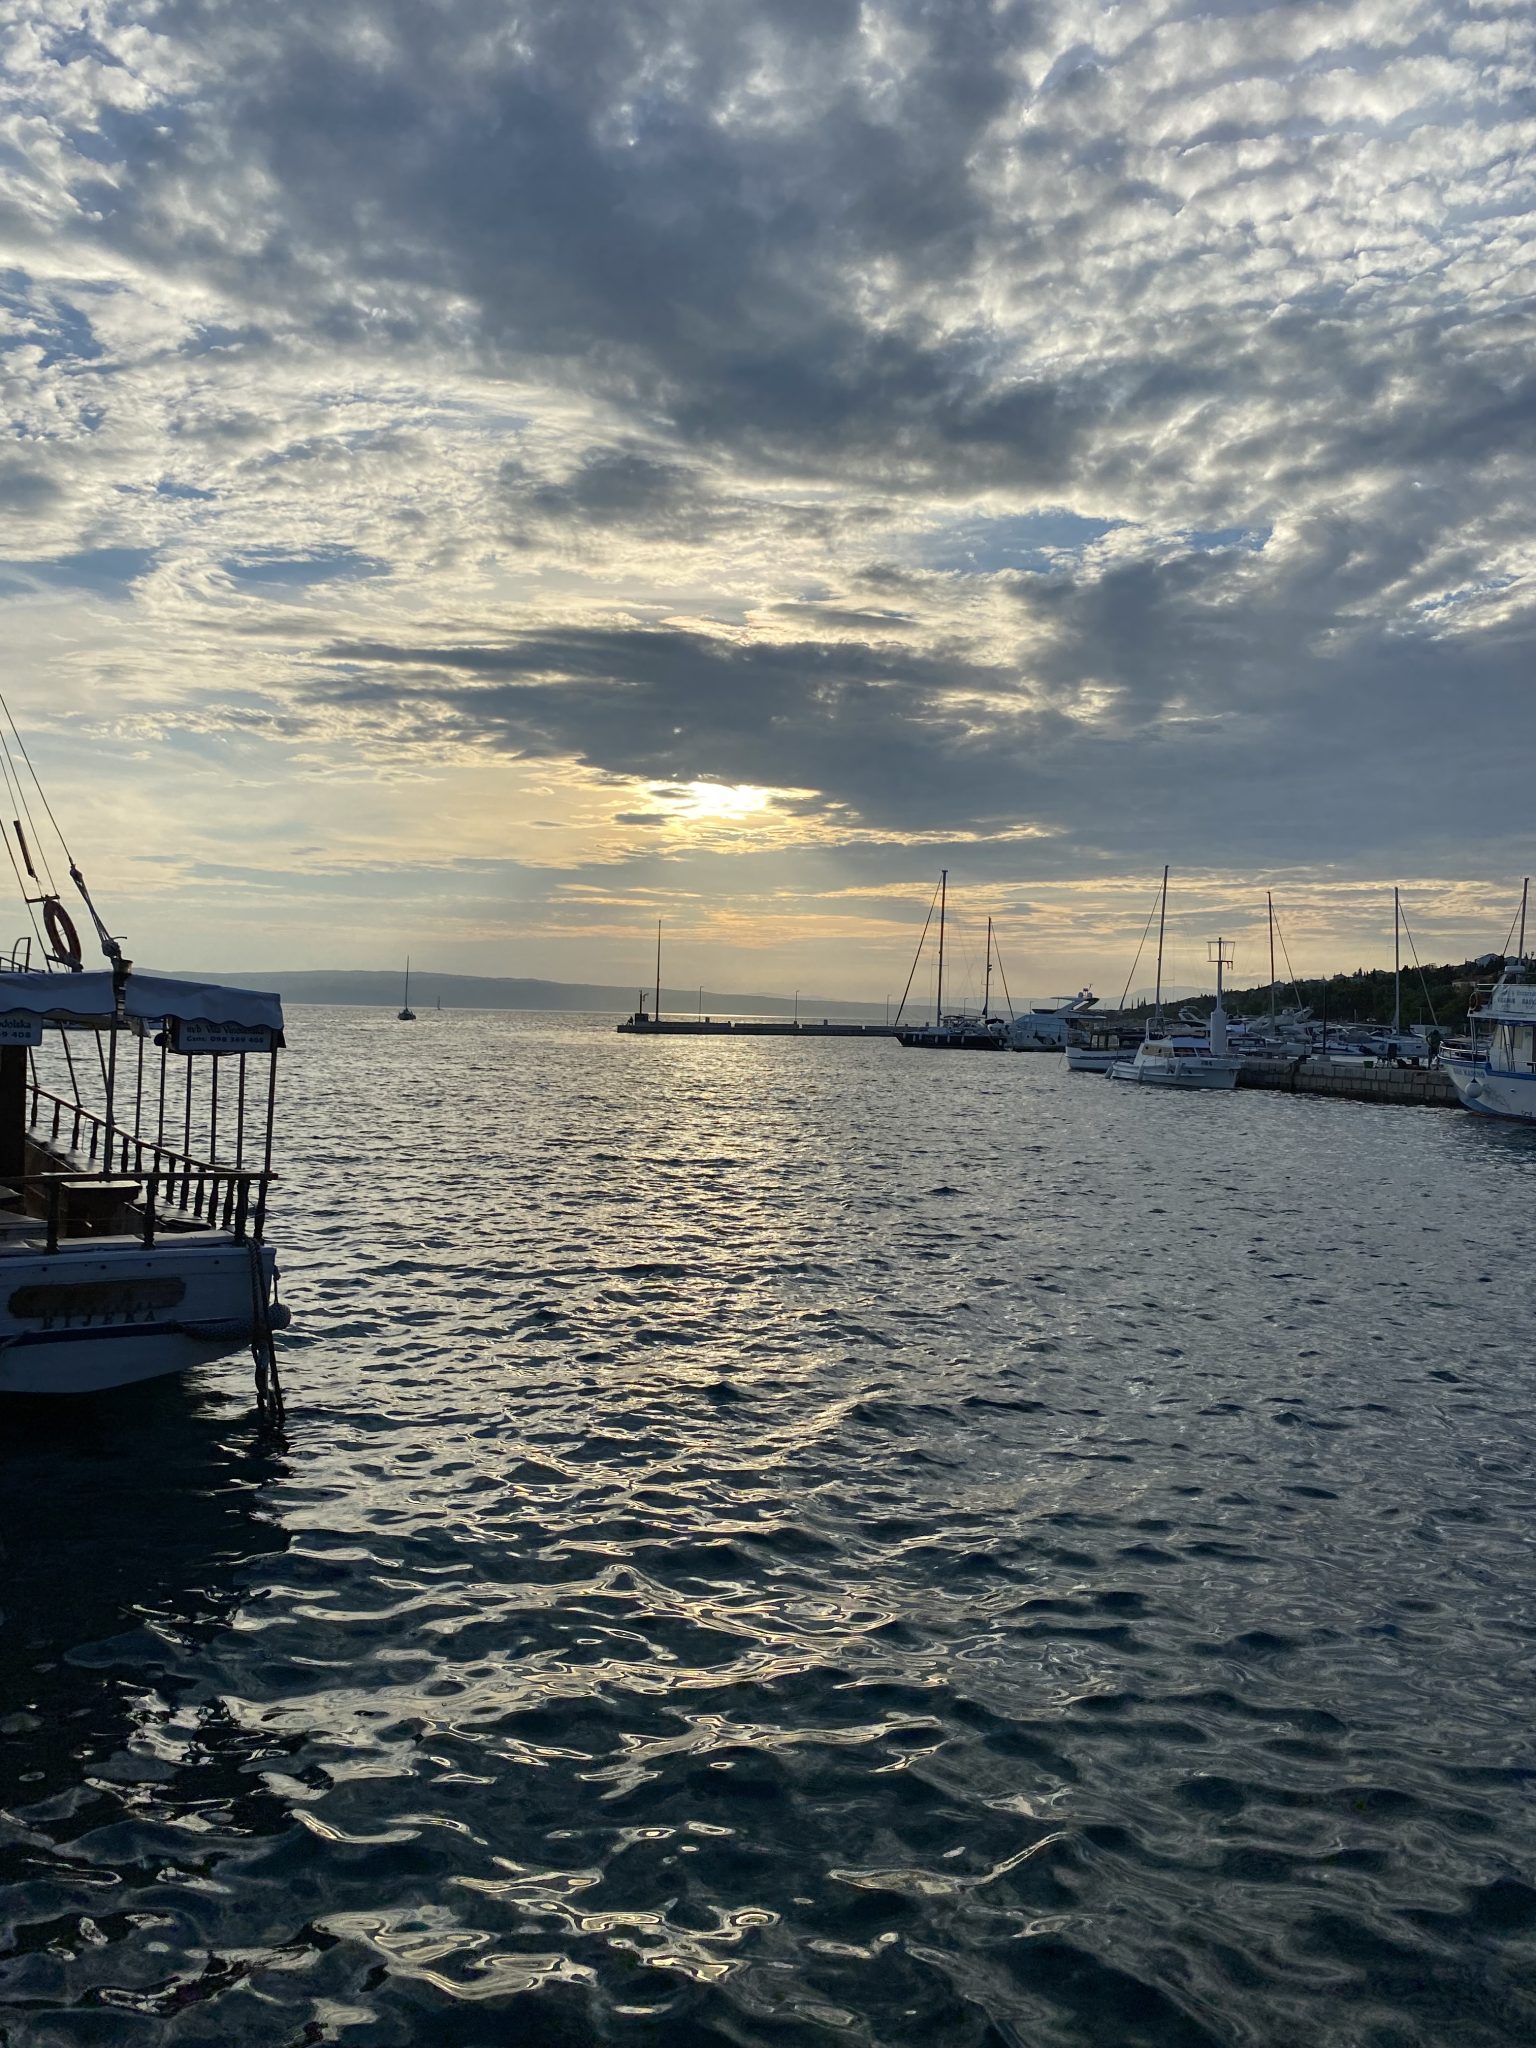 Picture from standing on the bay of marina novi in novi vinodolski looking out on the sea. There is a carpet of clouds with many holes on the sky, the sun is behind the clouds and is soon to set.